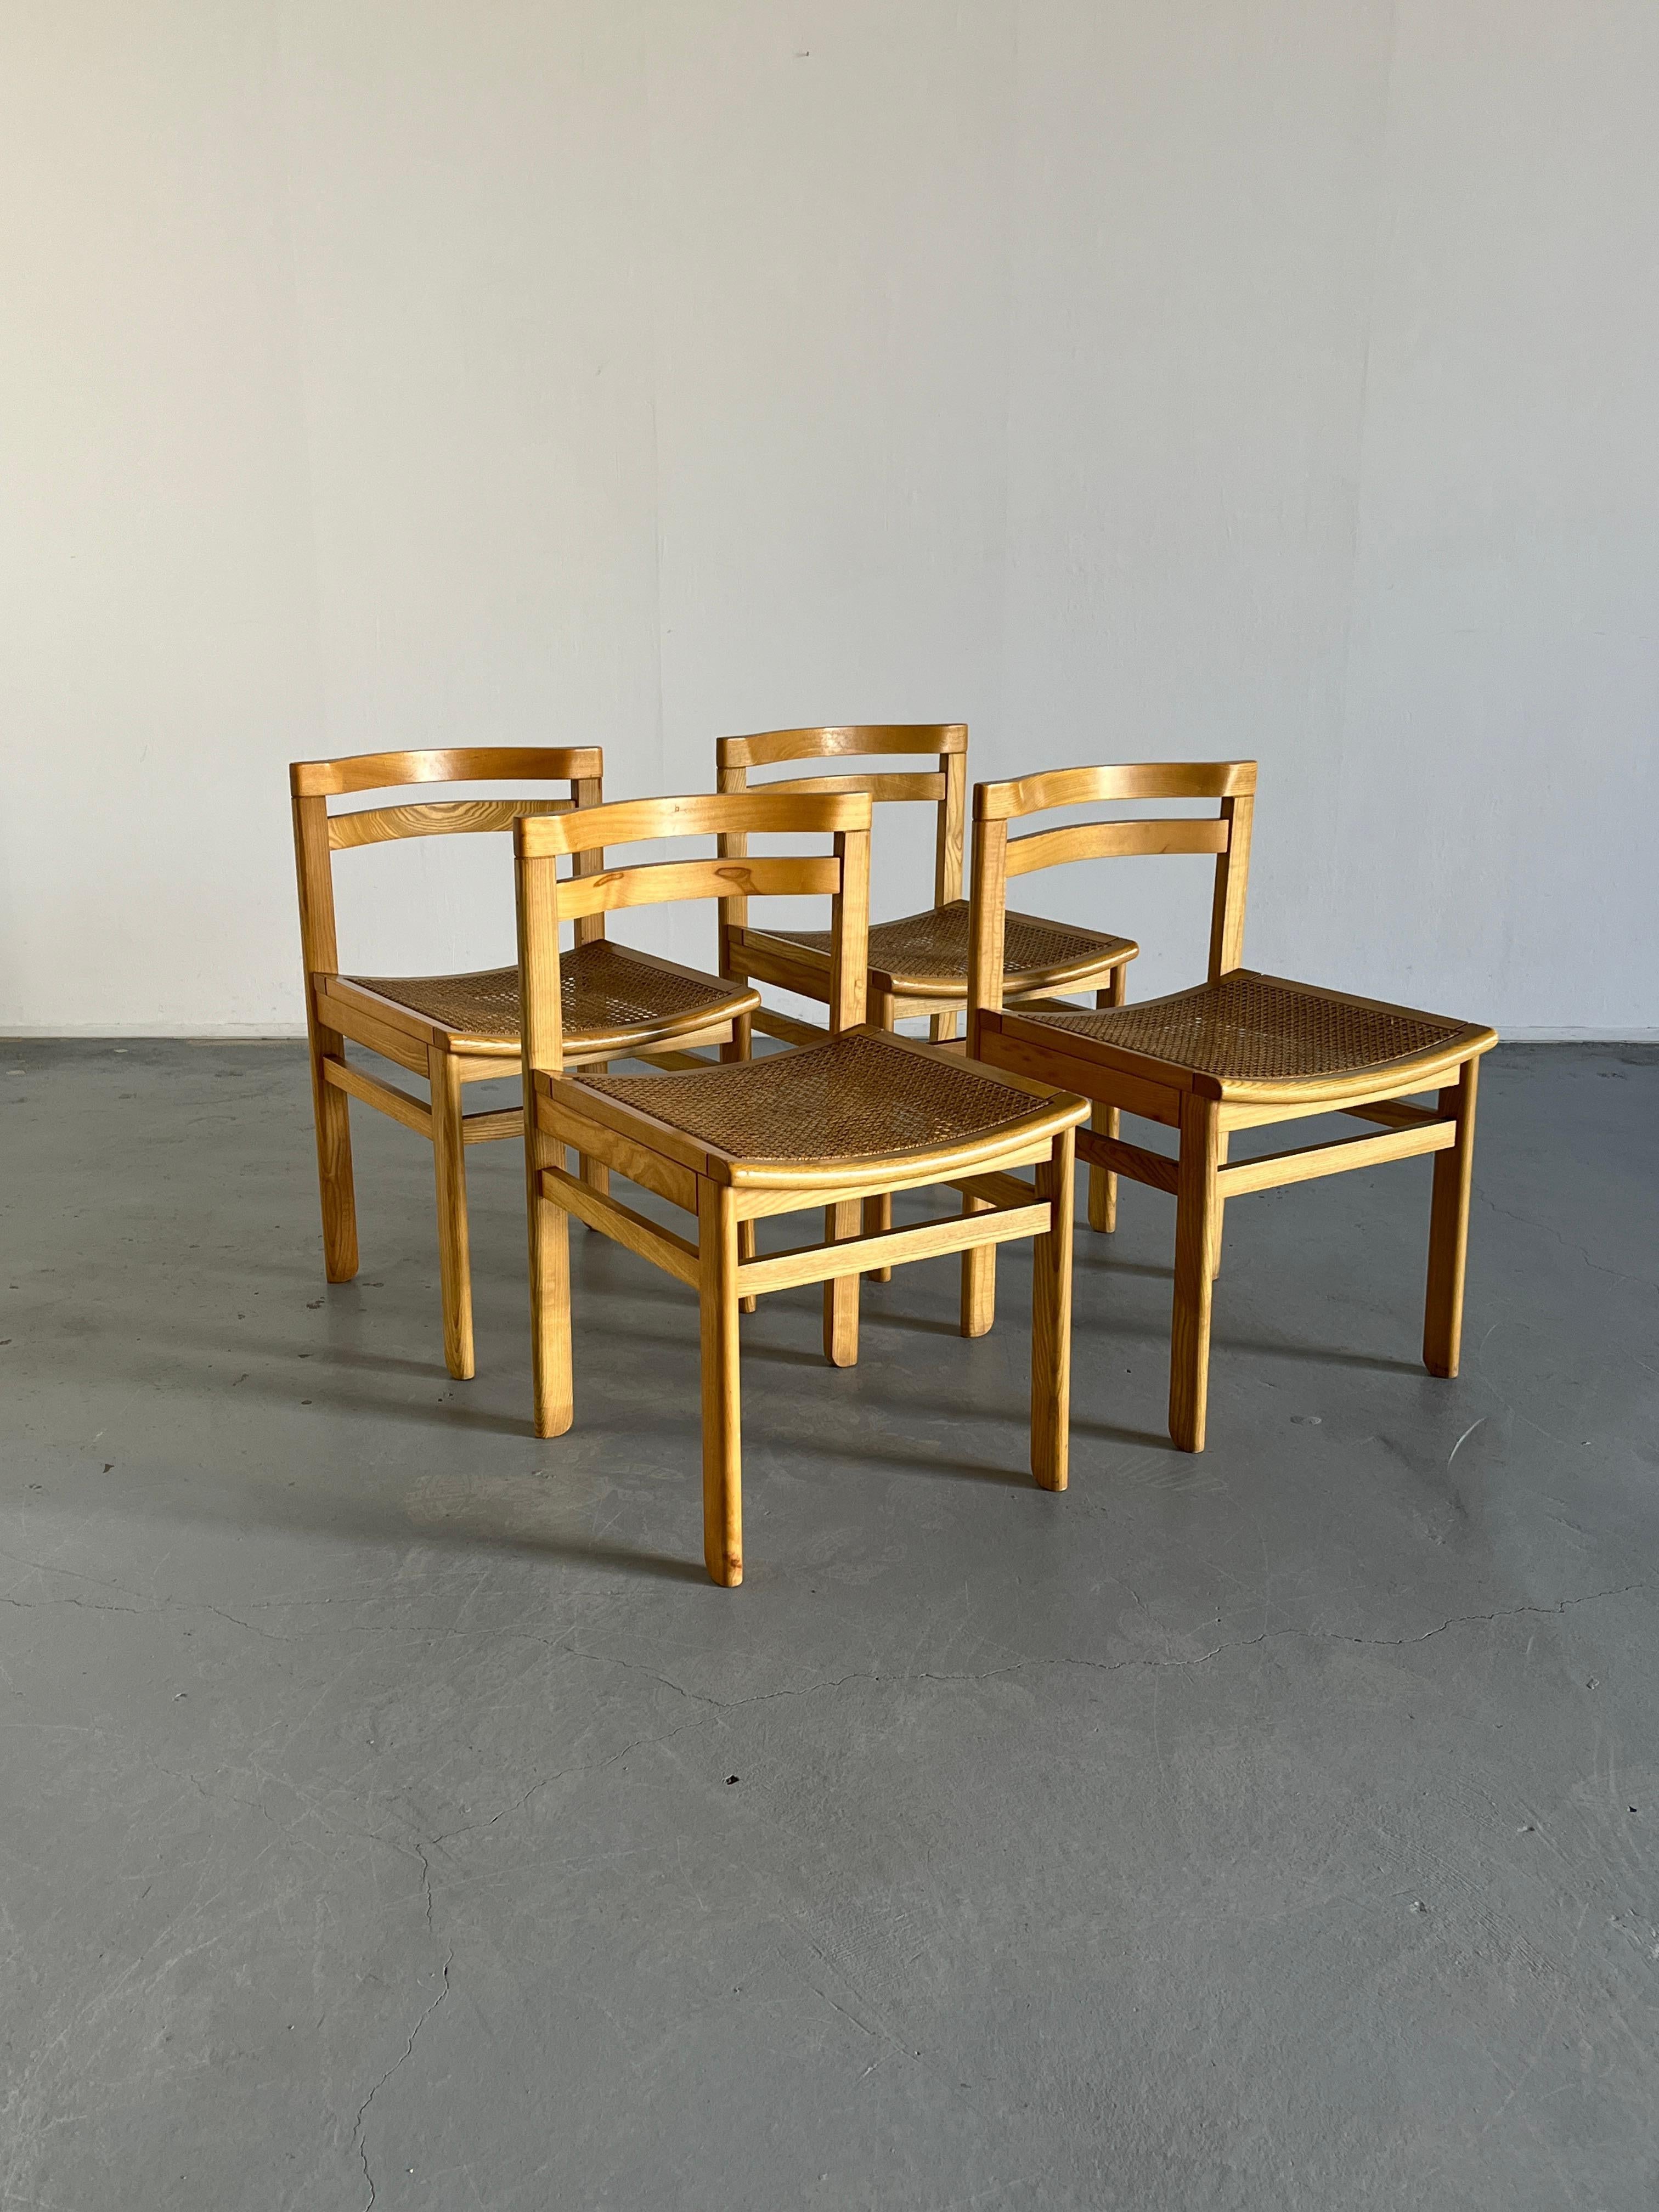 German Set of 4 Mid-Century Modern Constructivist Wooden Dining Chairs in Beech, 1960s For Sale